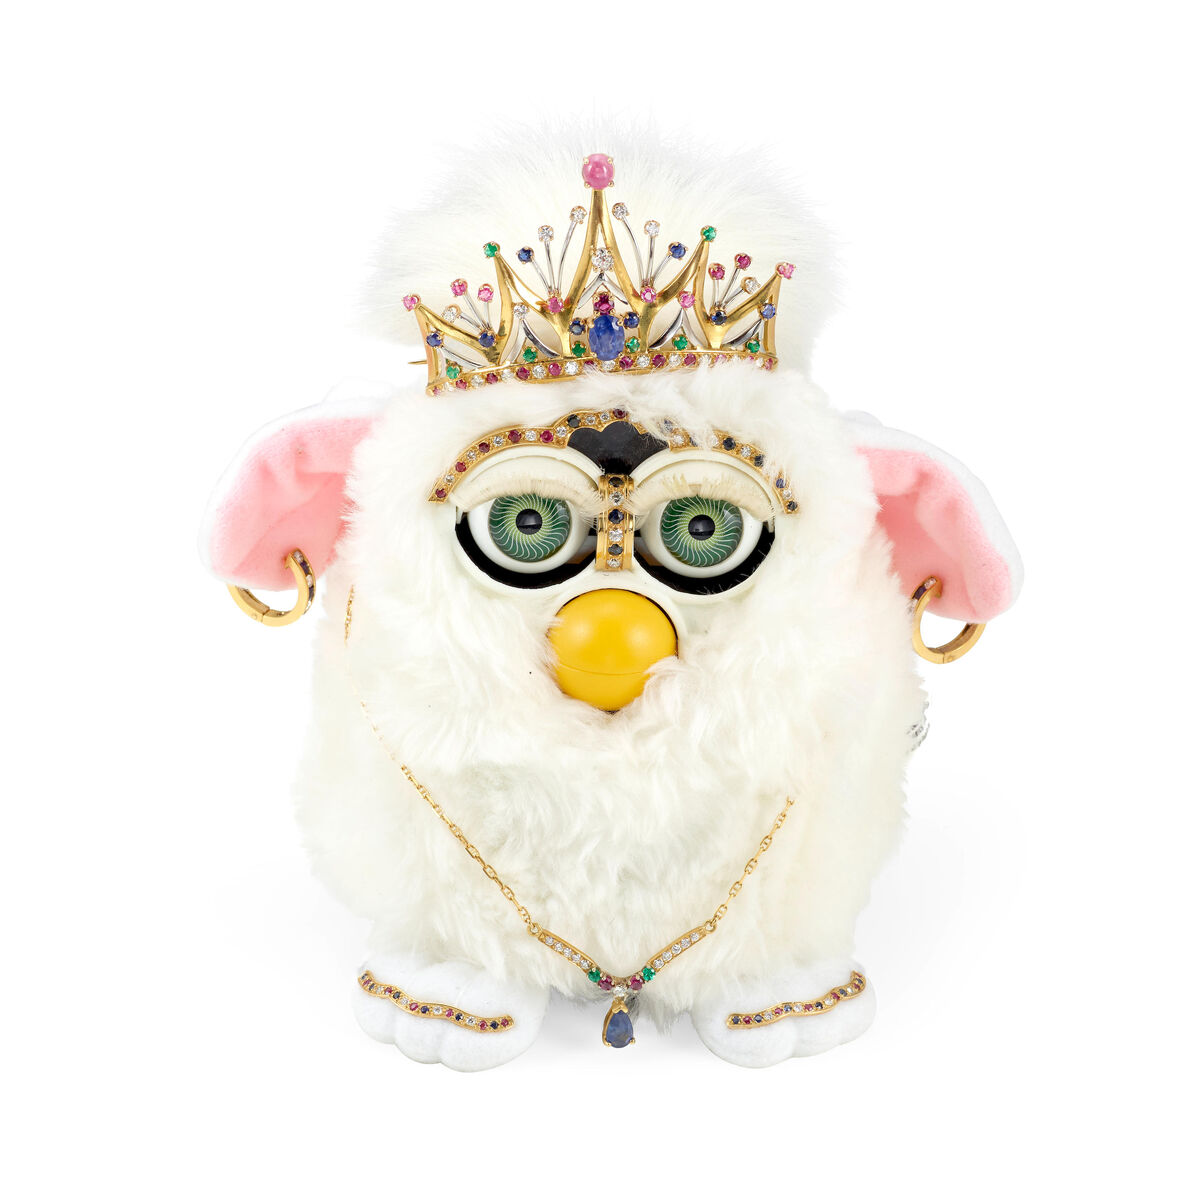 https://static.wikia.nocookie.net/official-furby/images/5/53/Image_%284%29.jpeg/revision/latest/scale-to-width-down/1200?cb=20230614090657